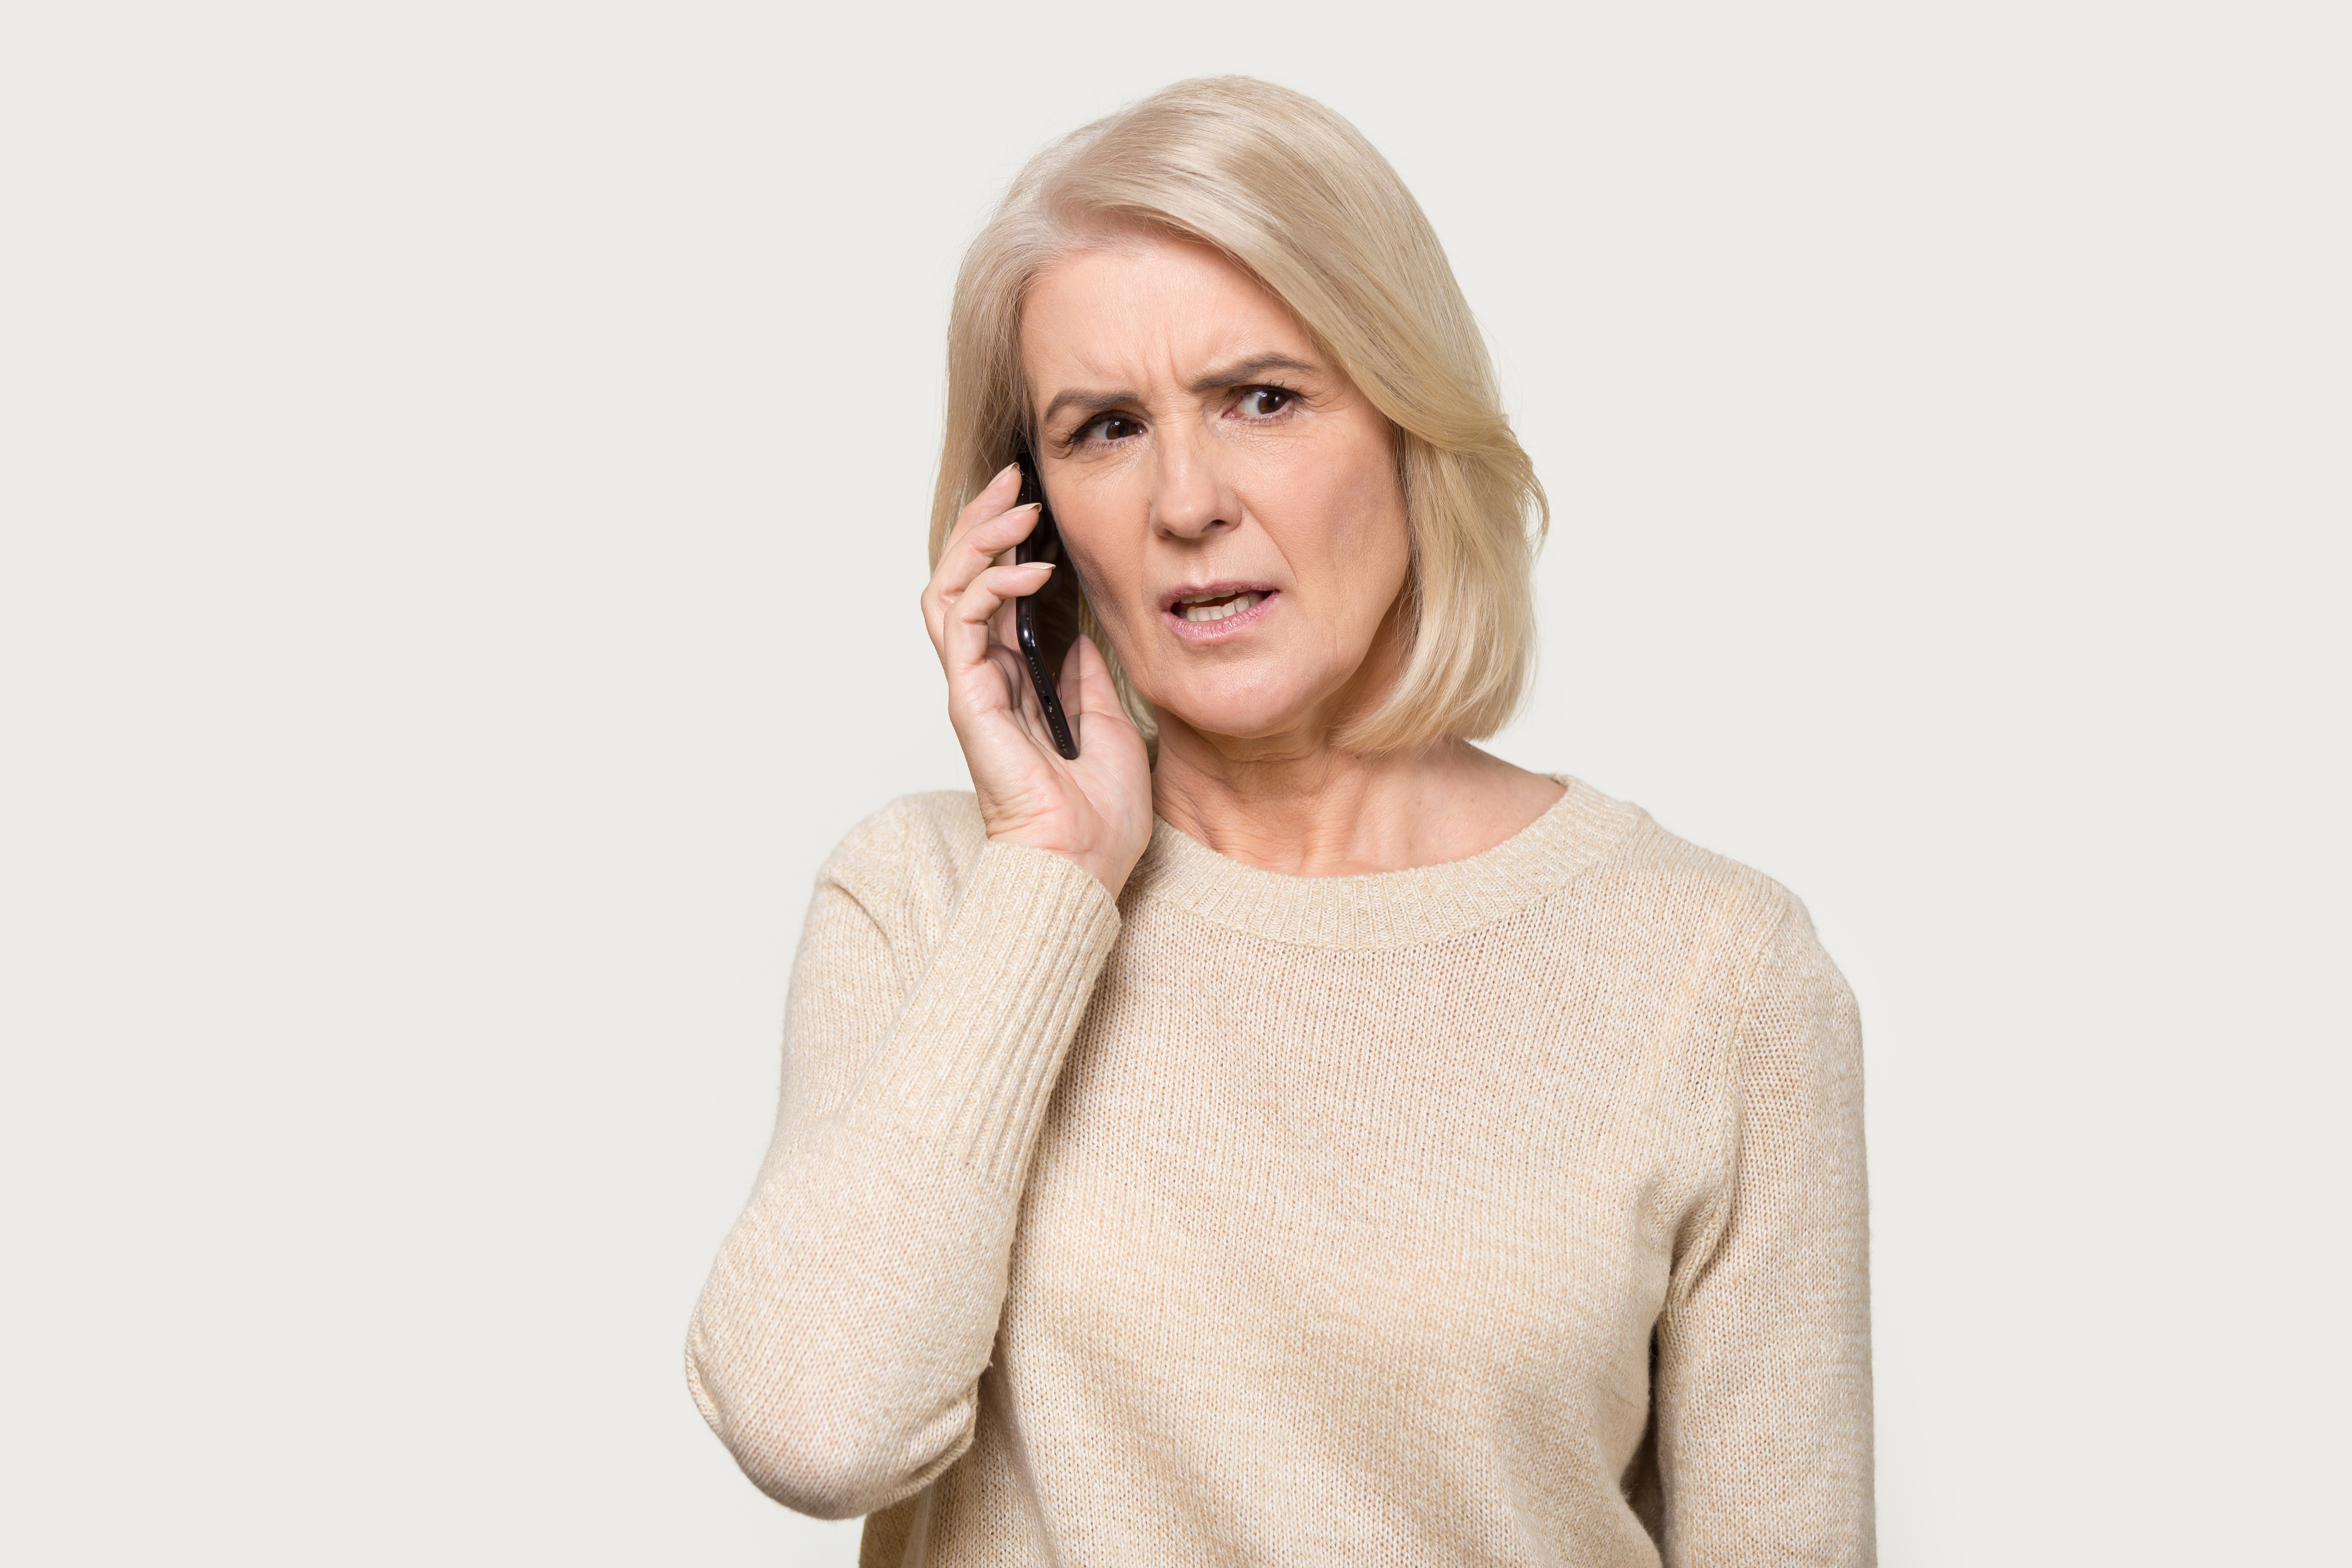 Woman talking on phone with worried expression | Source: Shutterstock